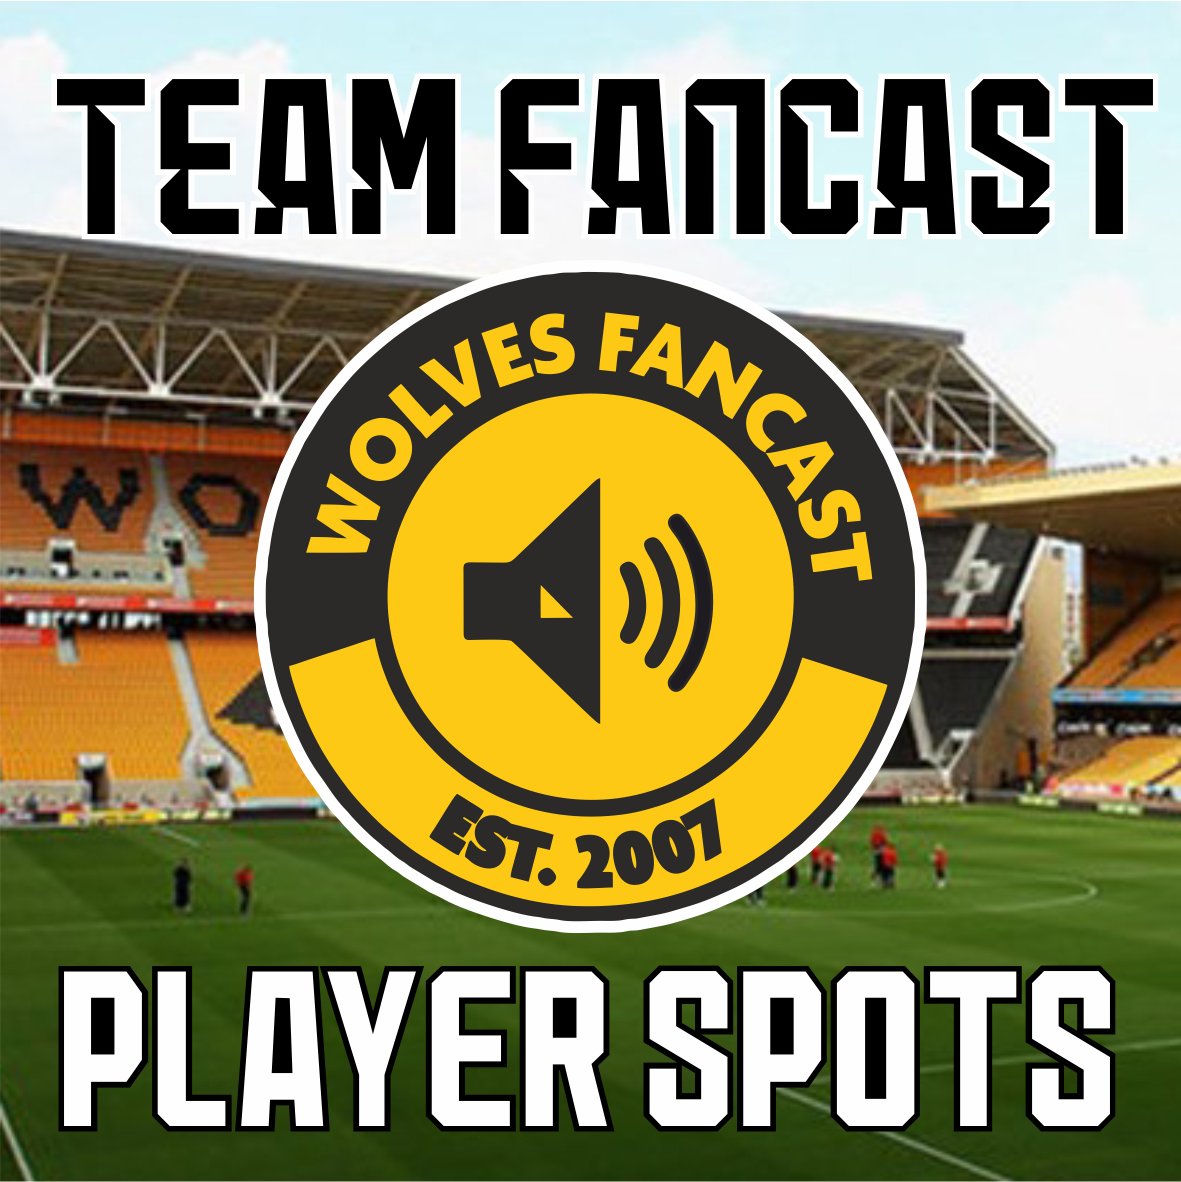 Wolves Fancast - Player Package